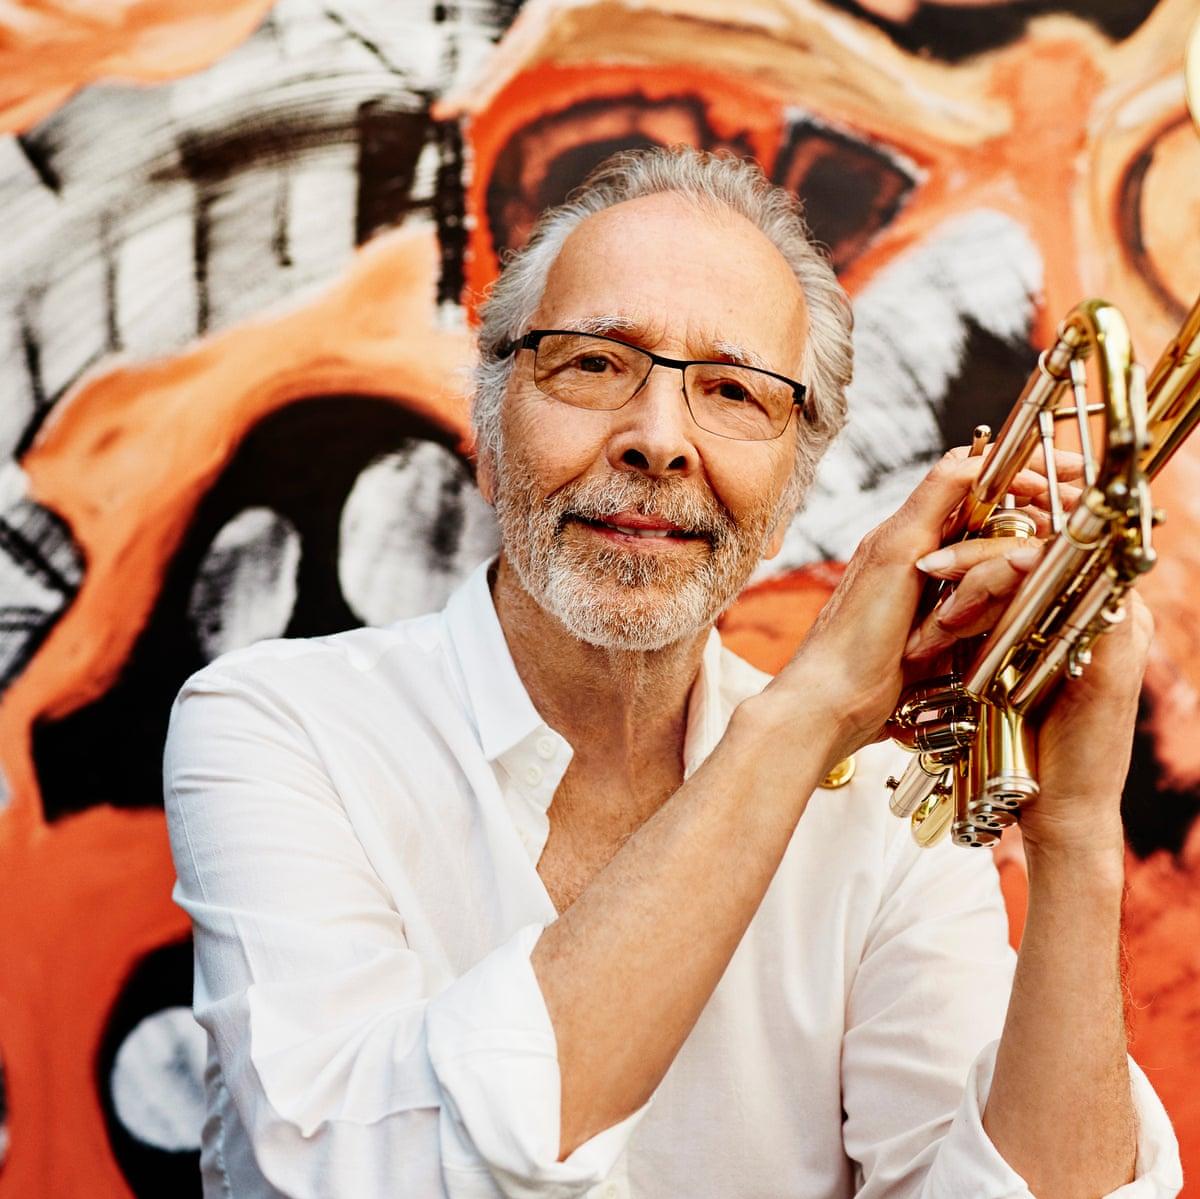 Herb Alpert If someone needed my fathers help he was always